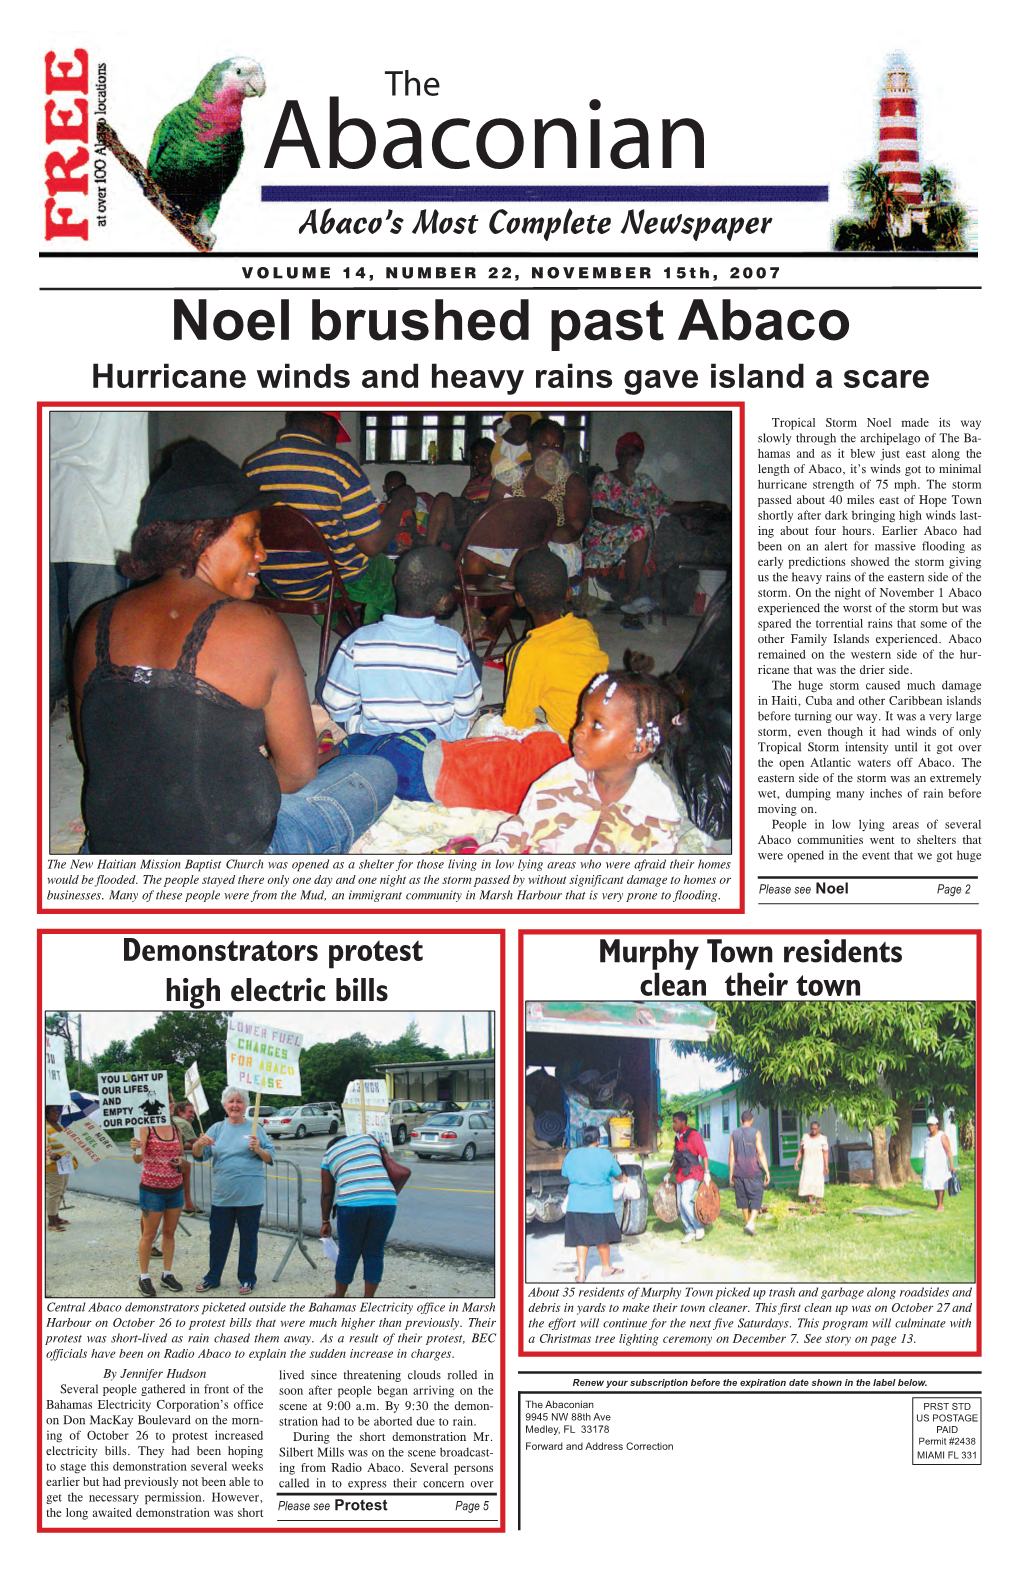 Noel Brushed Past Abaco Hurricane Winds and Heavy Rains Gave Island a Scare